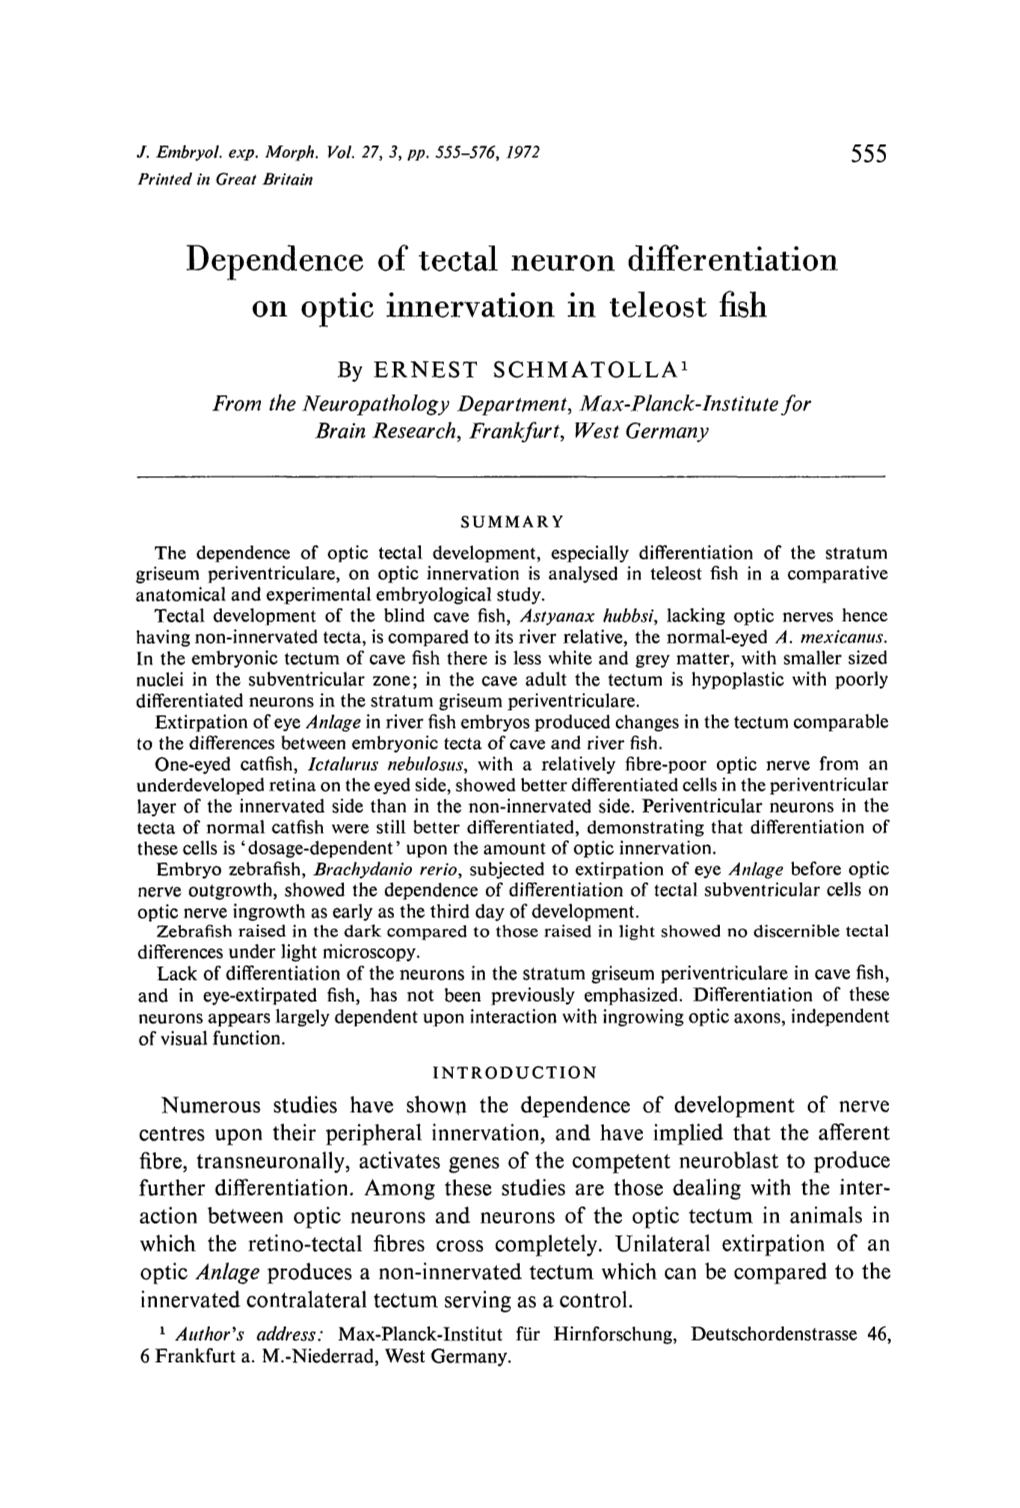 Dependence of Tectal Neuron Differentiation on Optic Innervation in Teleost Fish